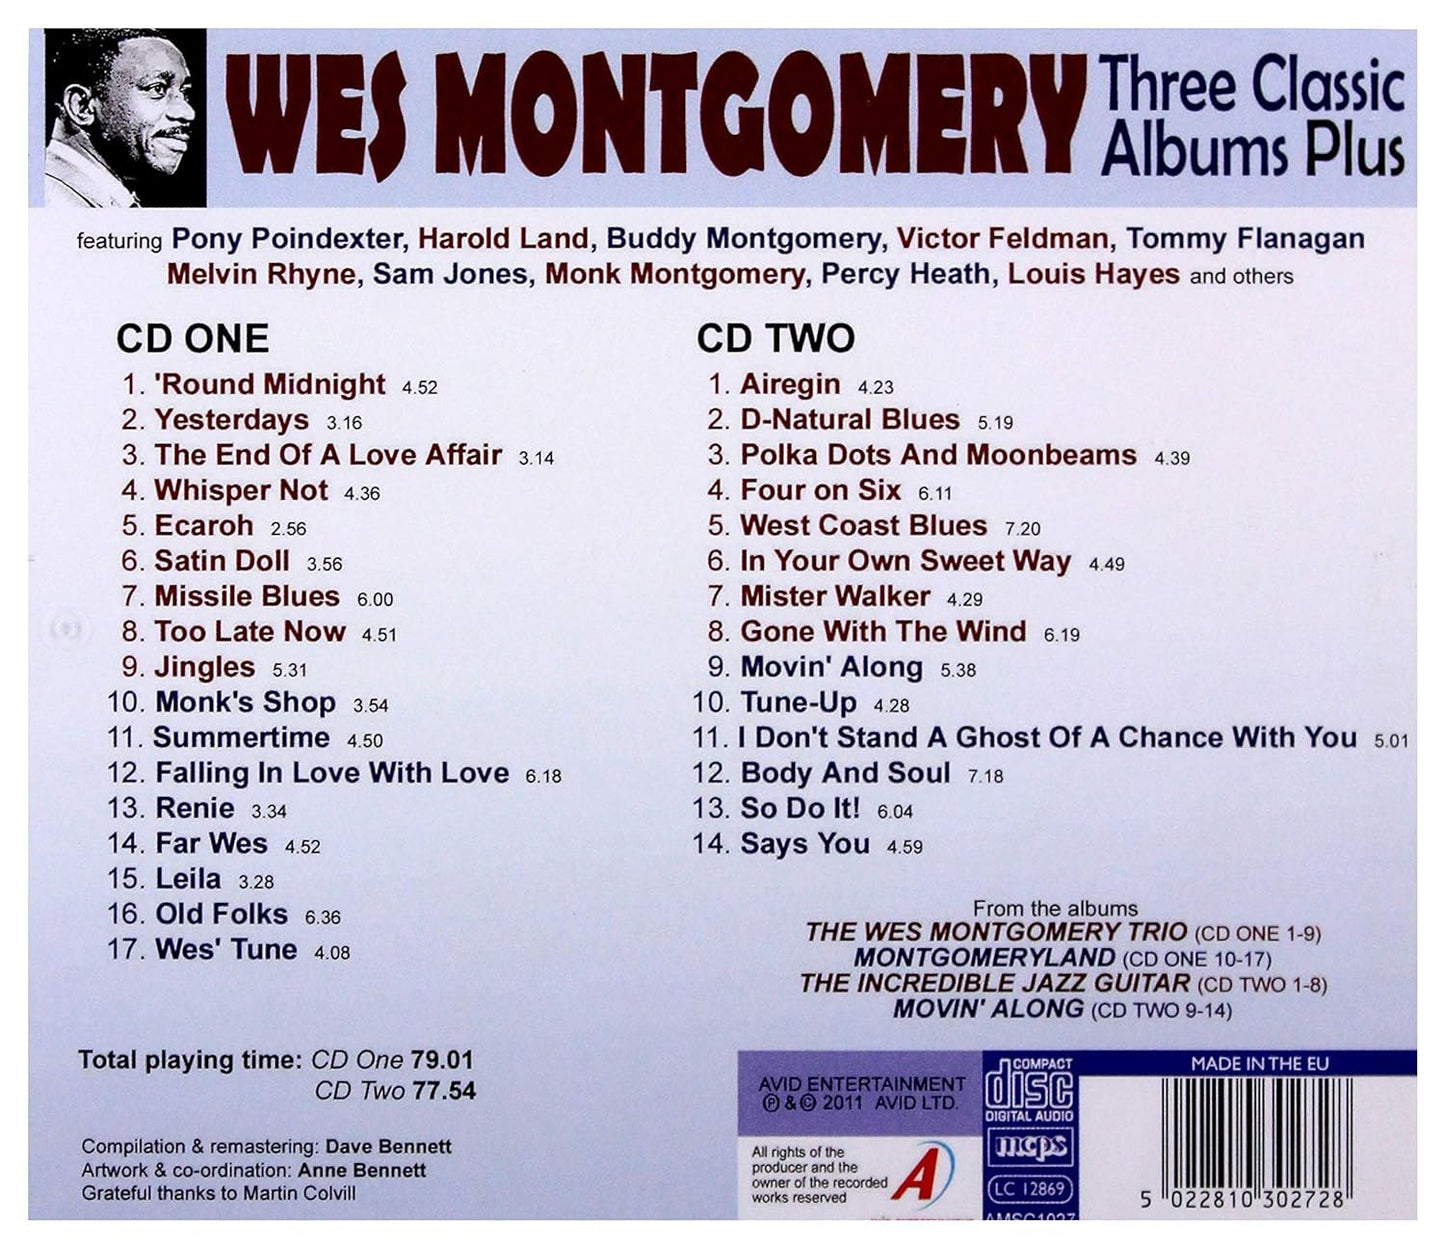 WES MONTGOMERY - Three Classic Albums Plus (The Wes Montgomery Trio / Montgomeryland / The Incredible Jazz Guitar) (2 CDS)